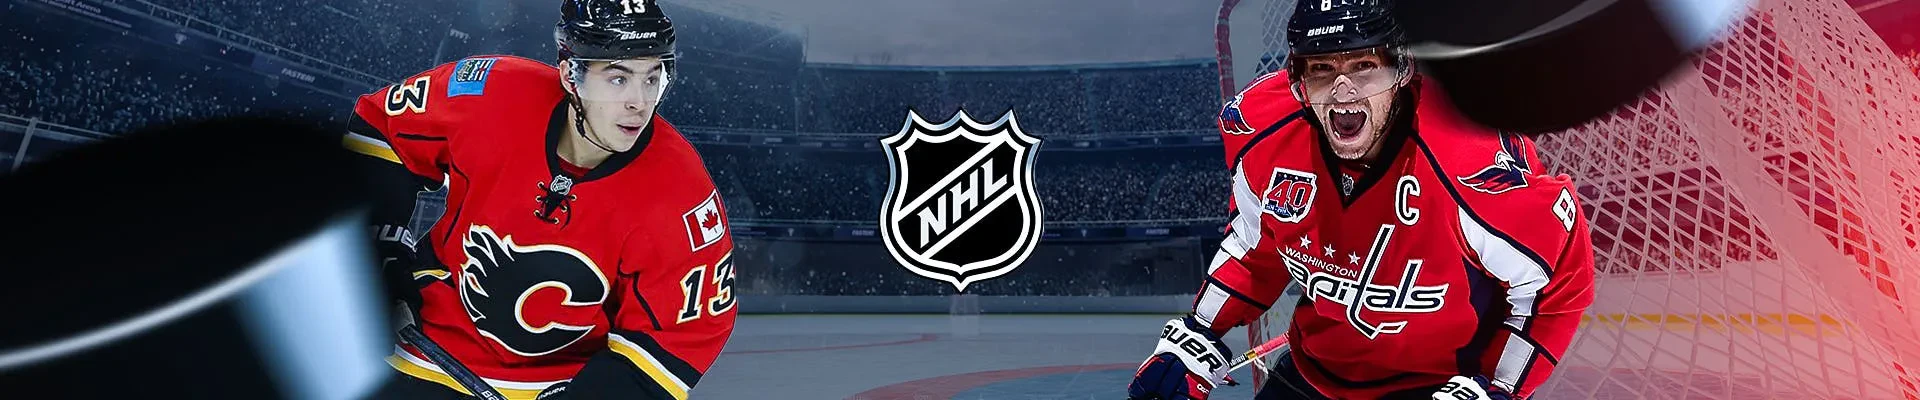 Header players to follow in NHL